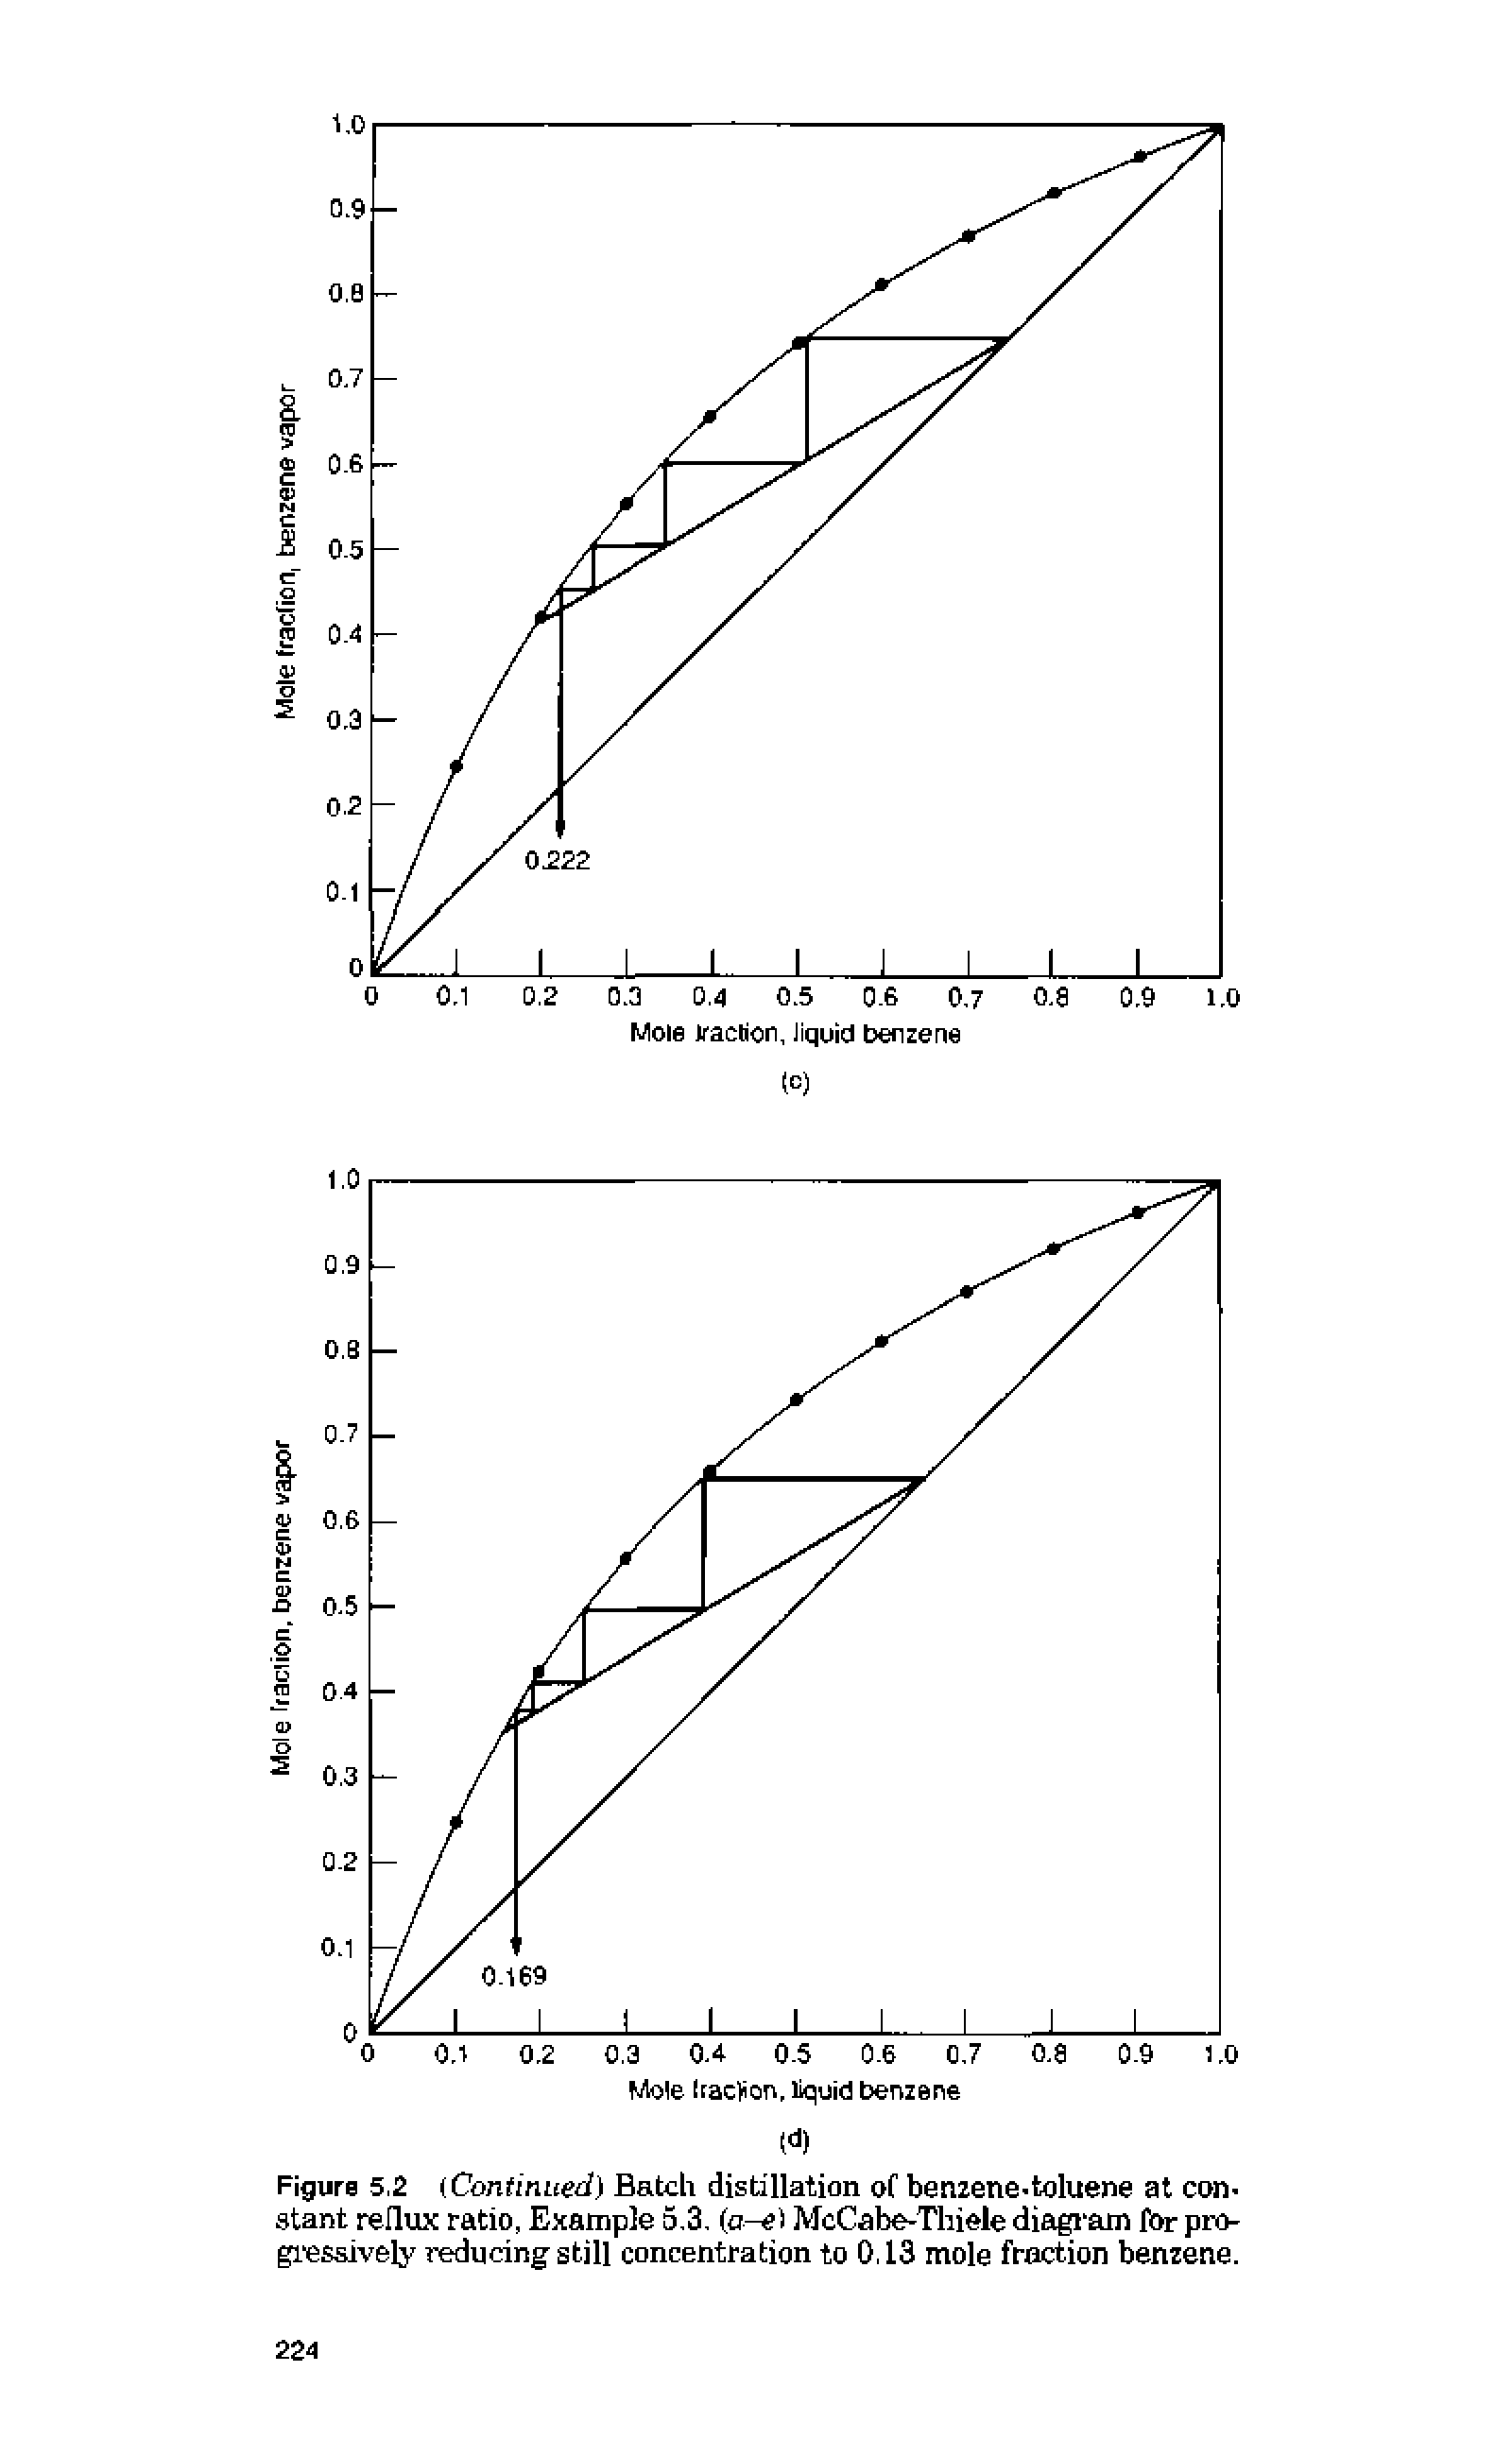 Figure 5,2 Continued) Batch distillation of benzene-toluene at constant rellux ratio, Example 5,3, (a-e) McCabe-Thiele diagram for progressively reducing still concentration to 0,13 mole fraction benzene.